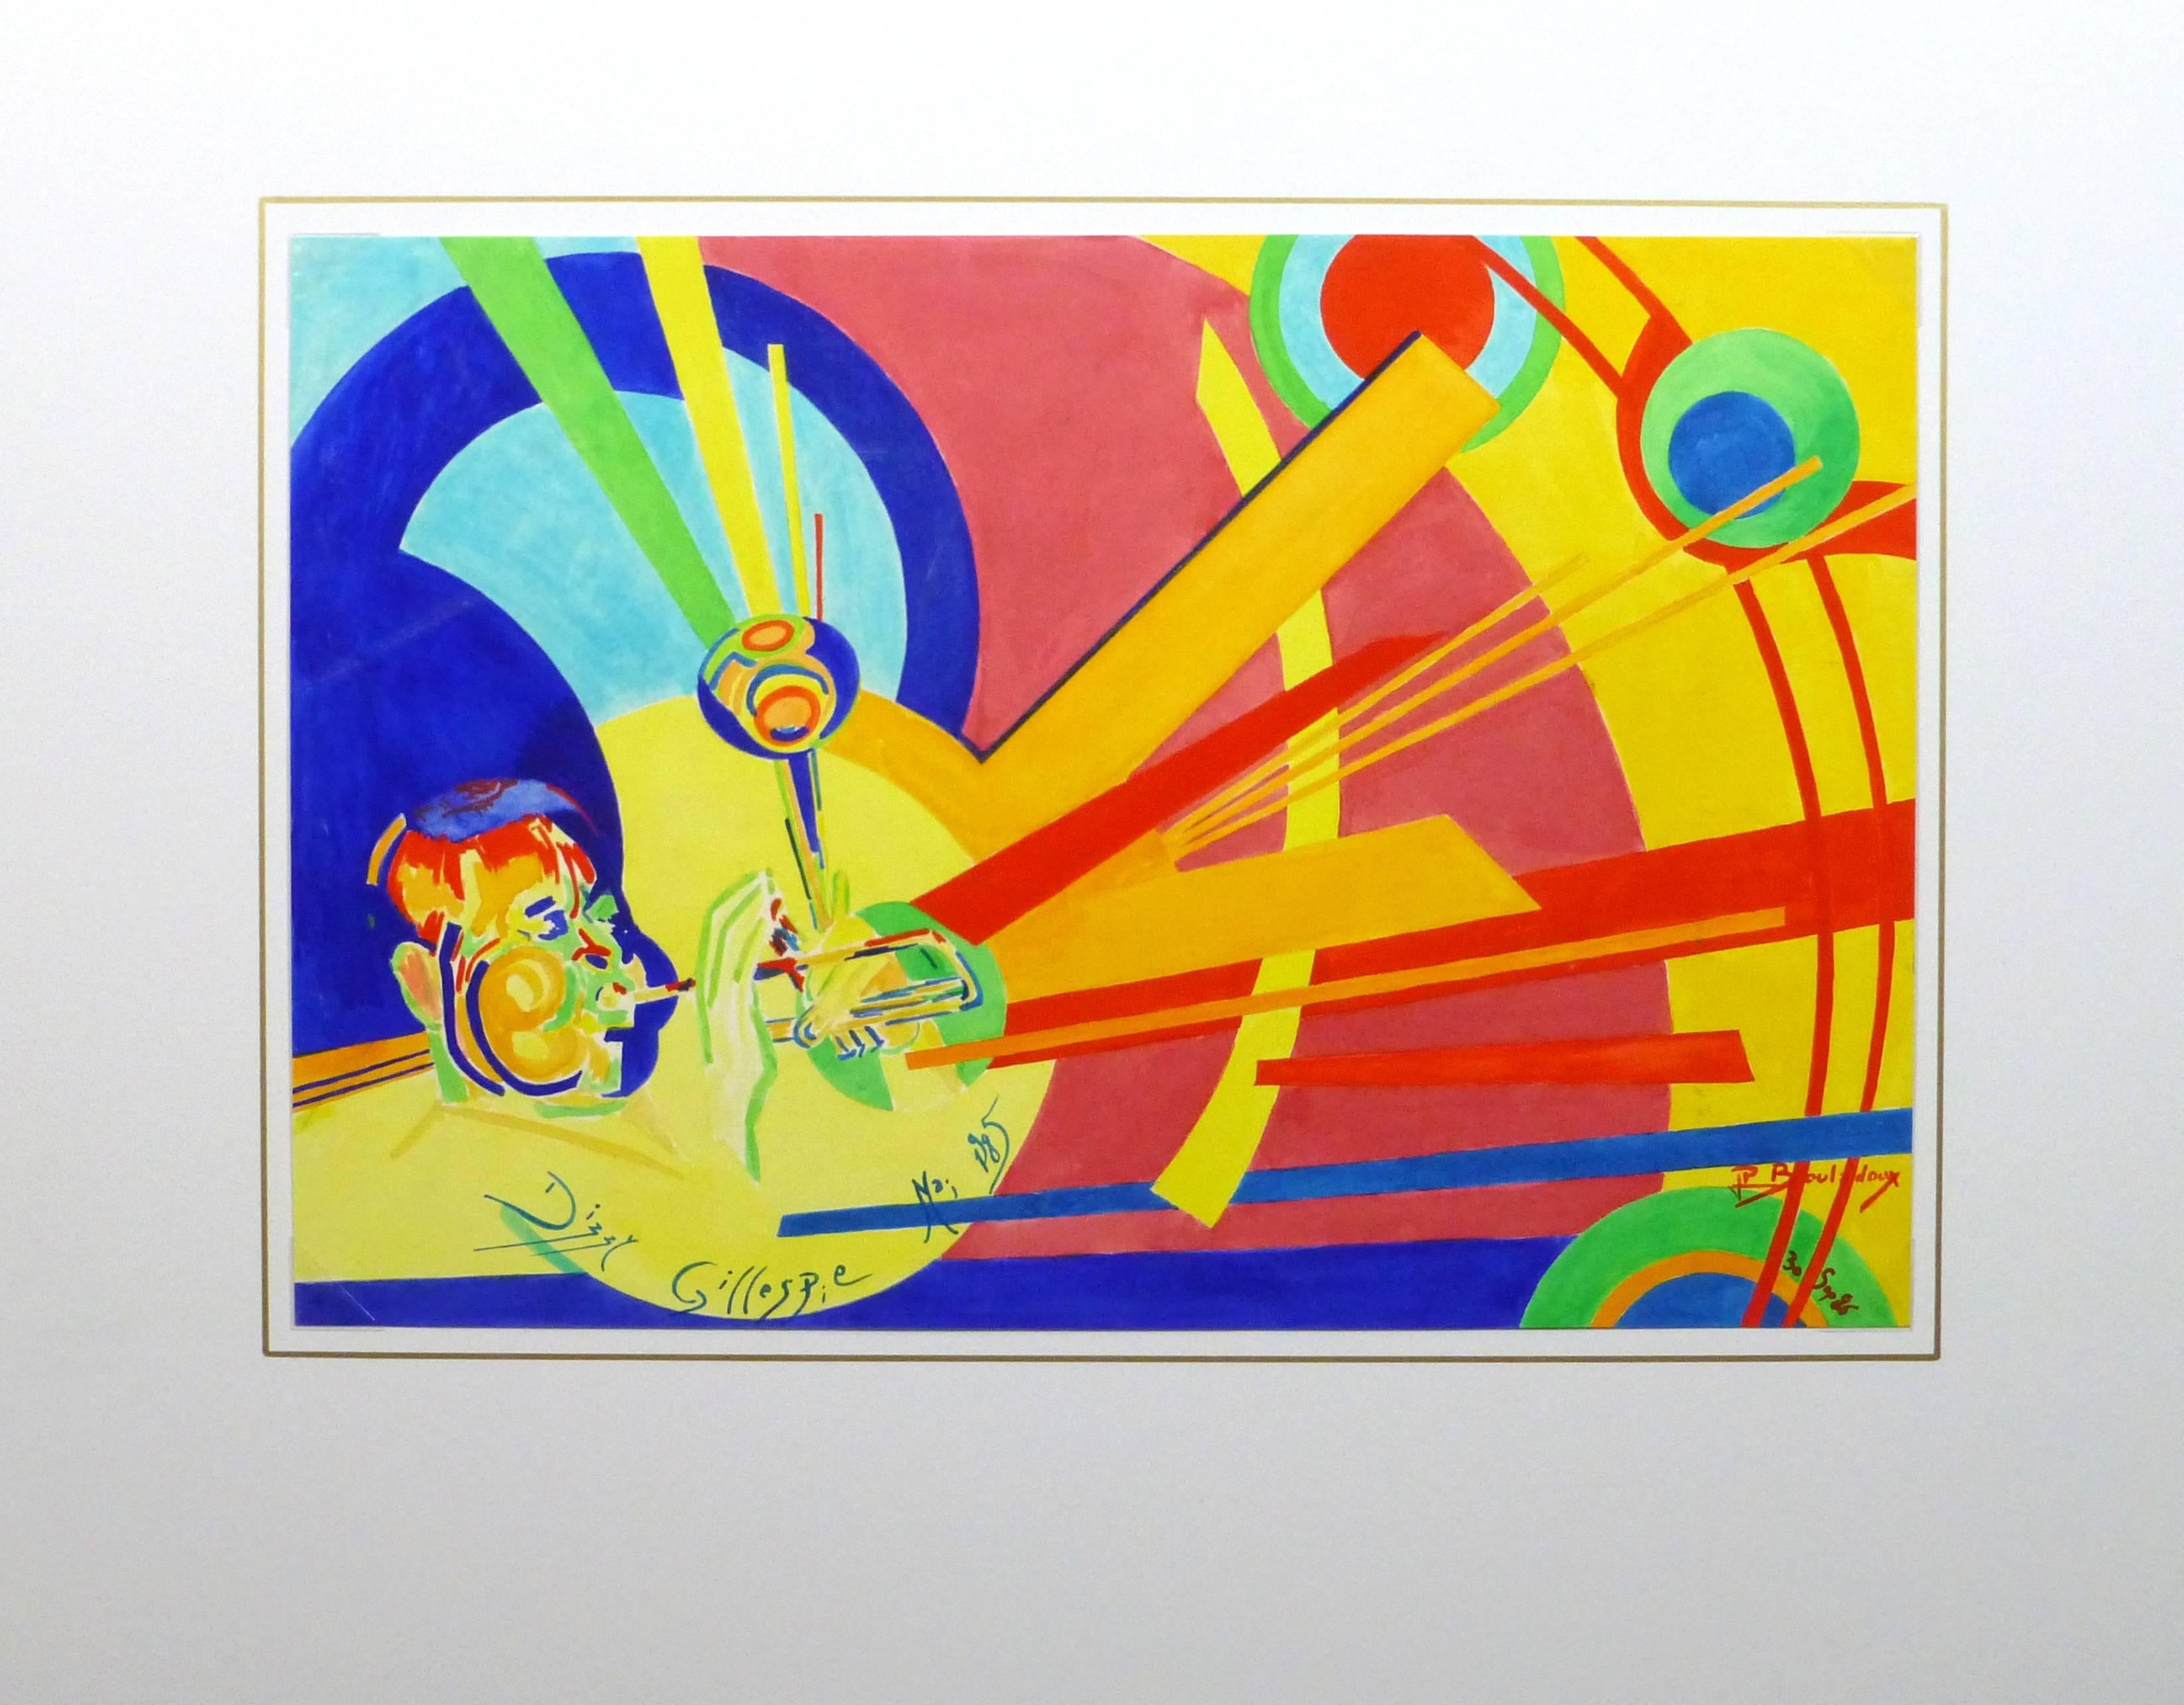 Dazzling use of color in this abstract acrylic tribute to the late Dizzy Gillespie by JP Bouladoux, 1986. Signed and dated lower right. 

Original artwork on paper displayed on a white mat with a gold border. Archival plastic sleeve and Certificate